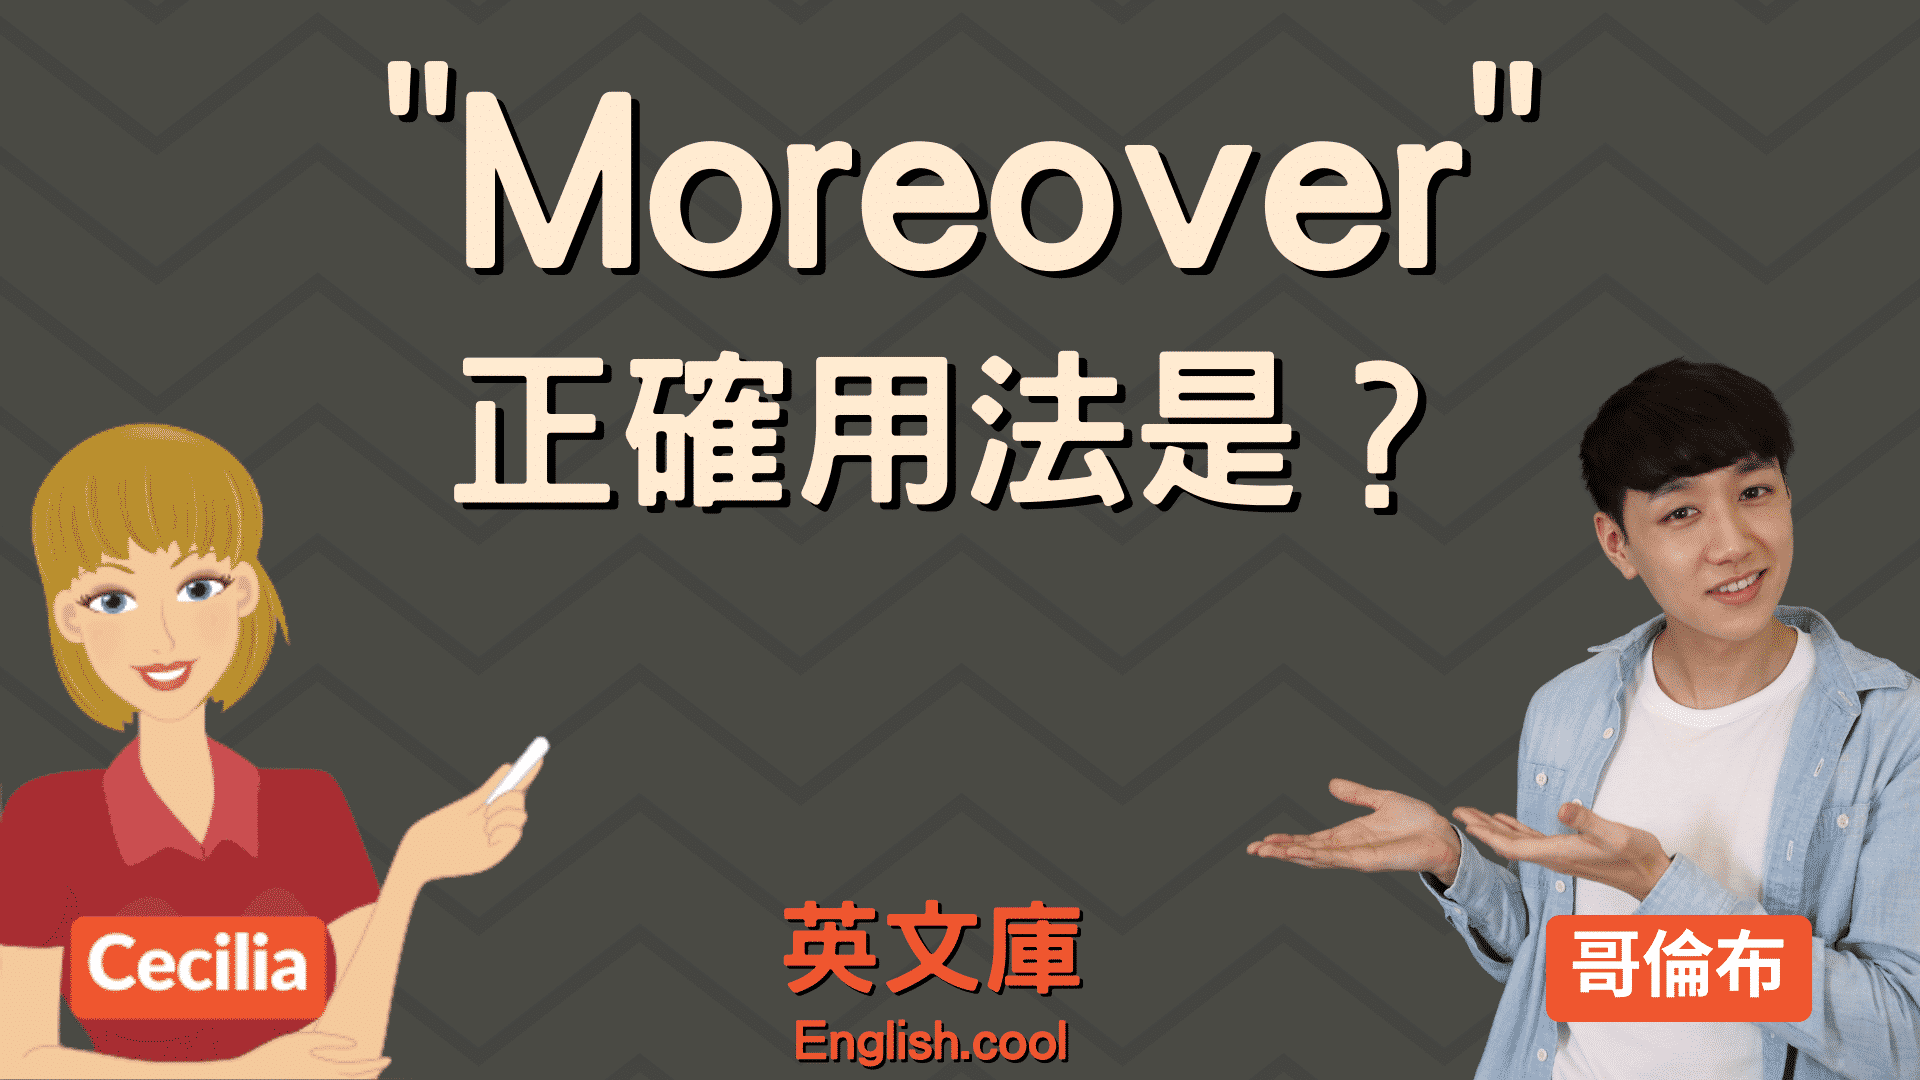 You are currently viewing 「moreover」正確用法是？來看例句一次搞懂！